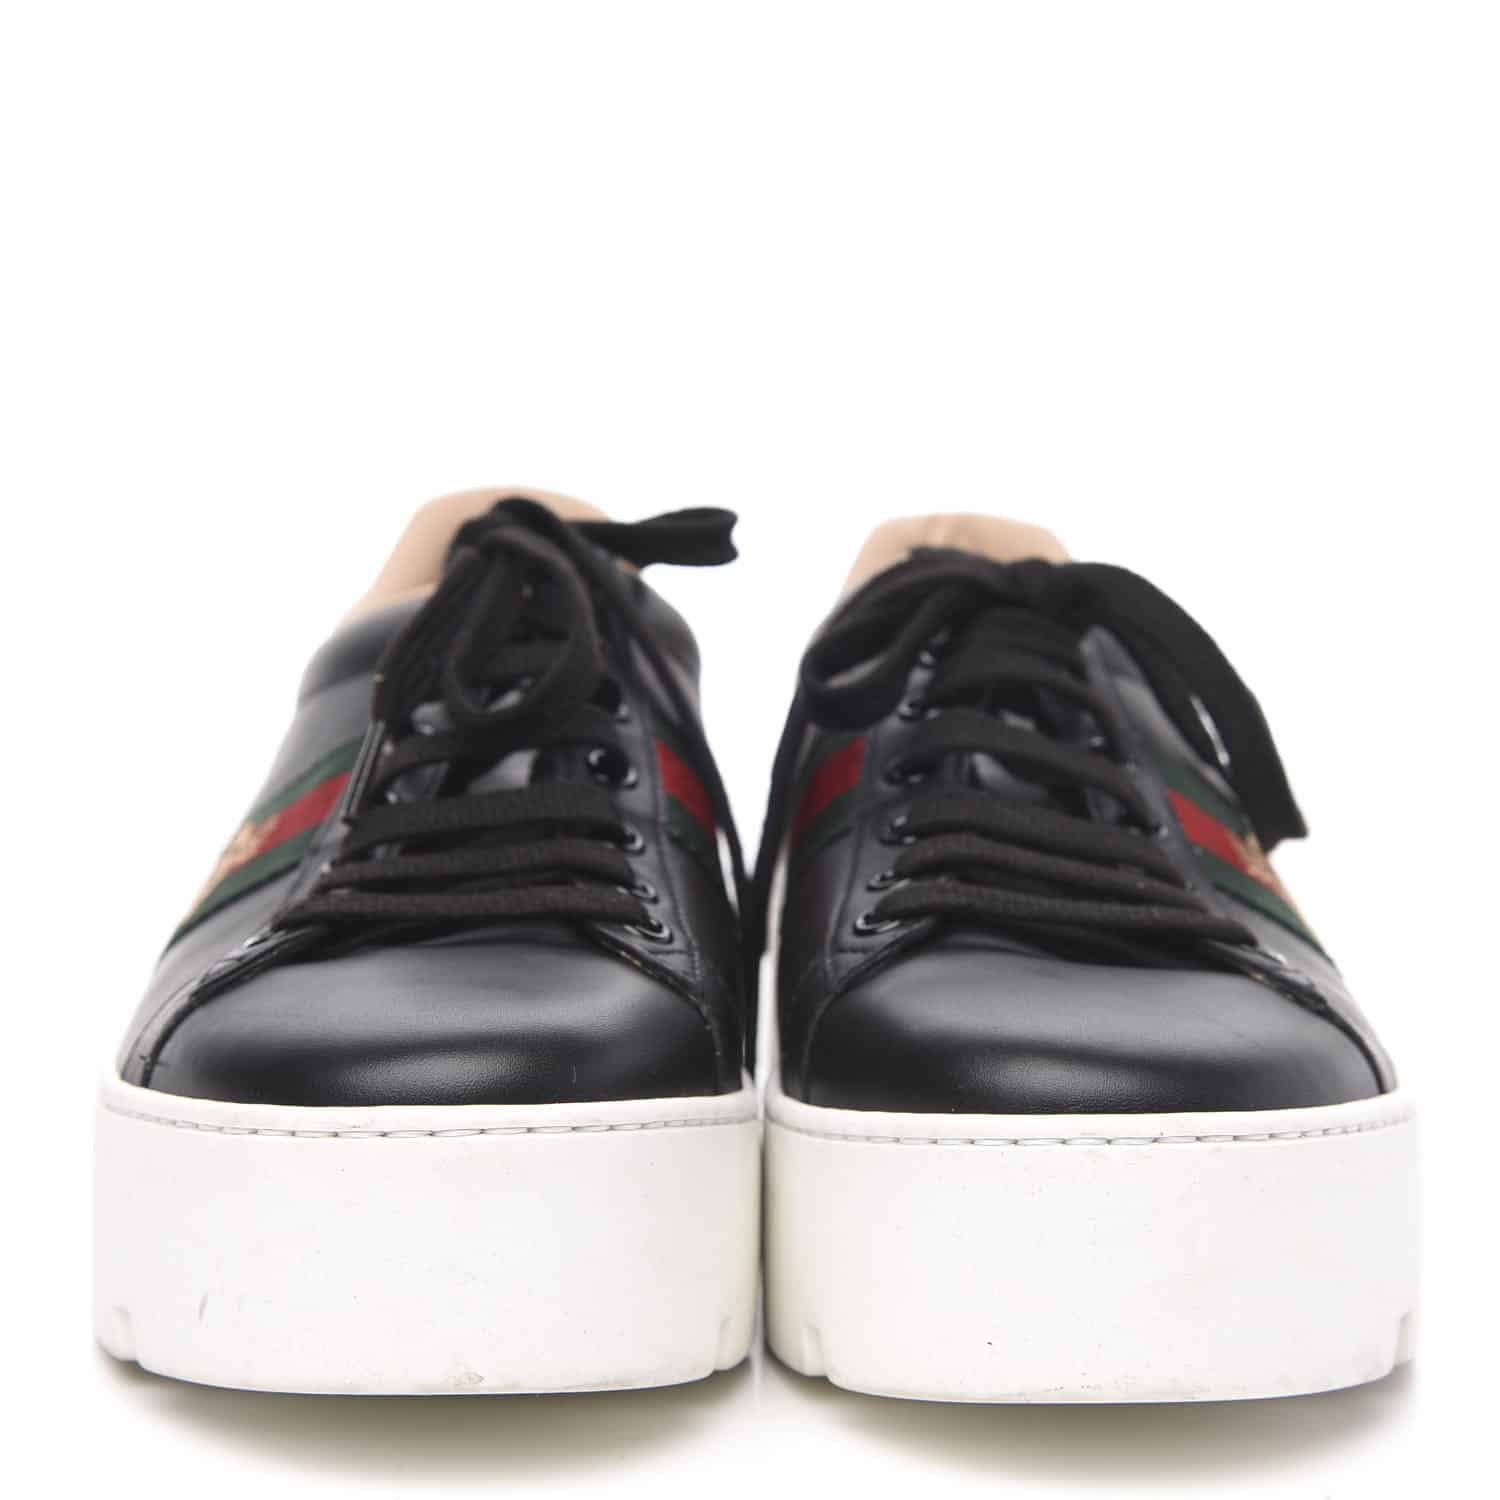 GUCCI Calfskin Embroidered Womens Ace Platform Sneakers 40.5 Black 625976